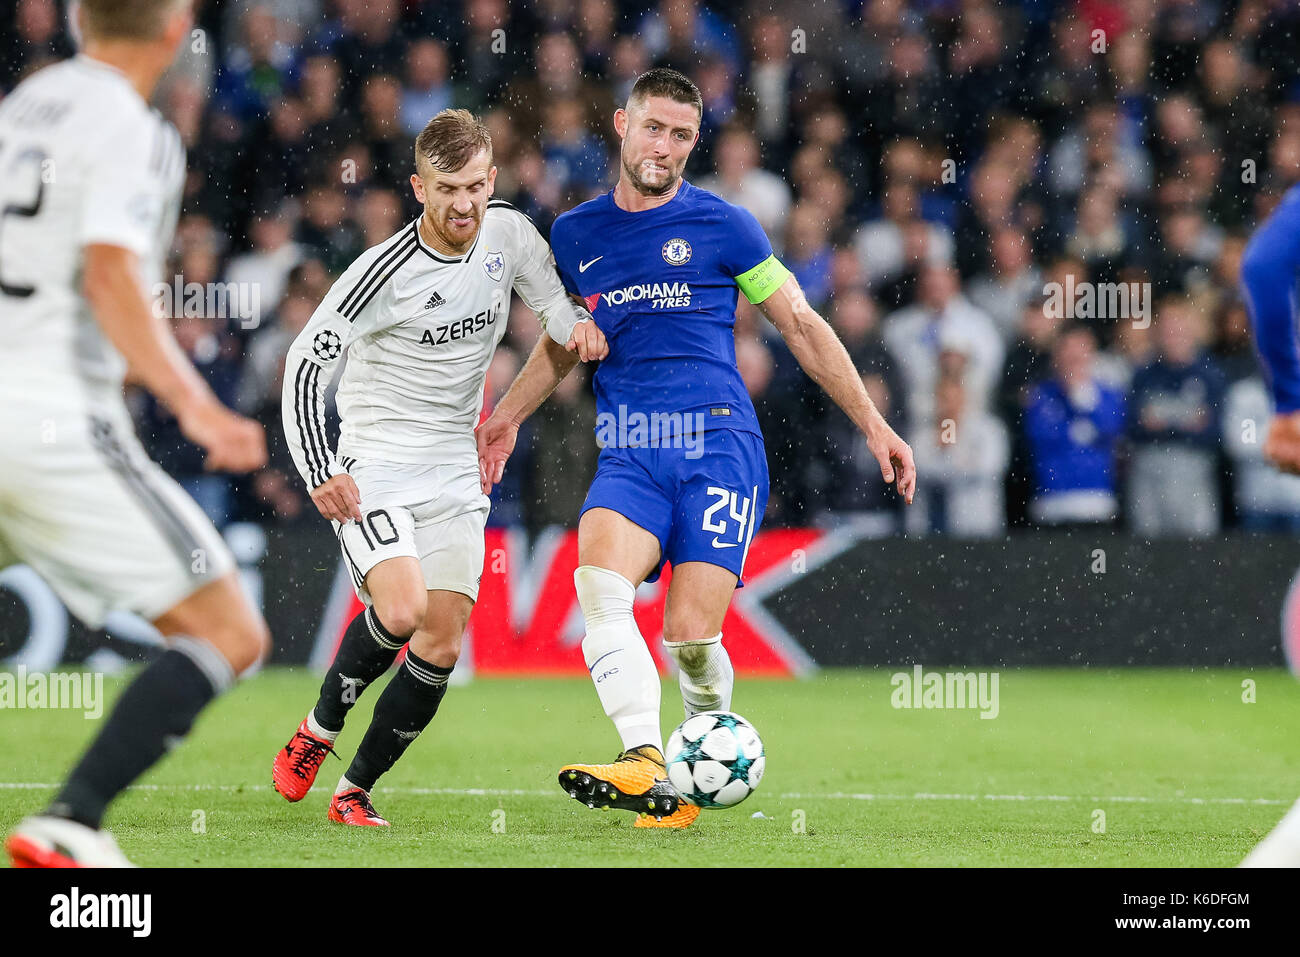 London, UK. 12th Sep, 2017. Gary Cahill (Chelsea) Football/Soccer : Gary Cahill of Chelsea during the UEFA Champions League Group Stage match between Chelsea and Qarabag FK at Stamford Bridge in London, England . Credit: AFLO/Alamy Live News Stock Photo